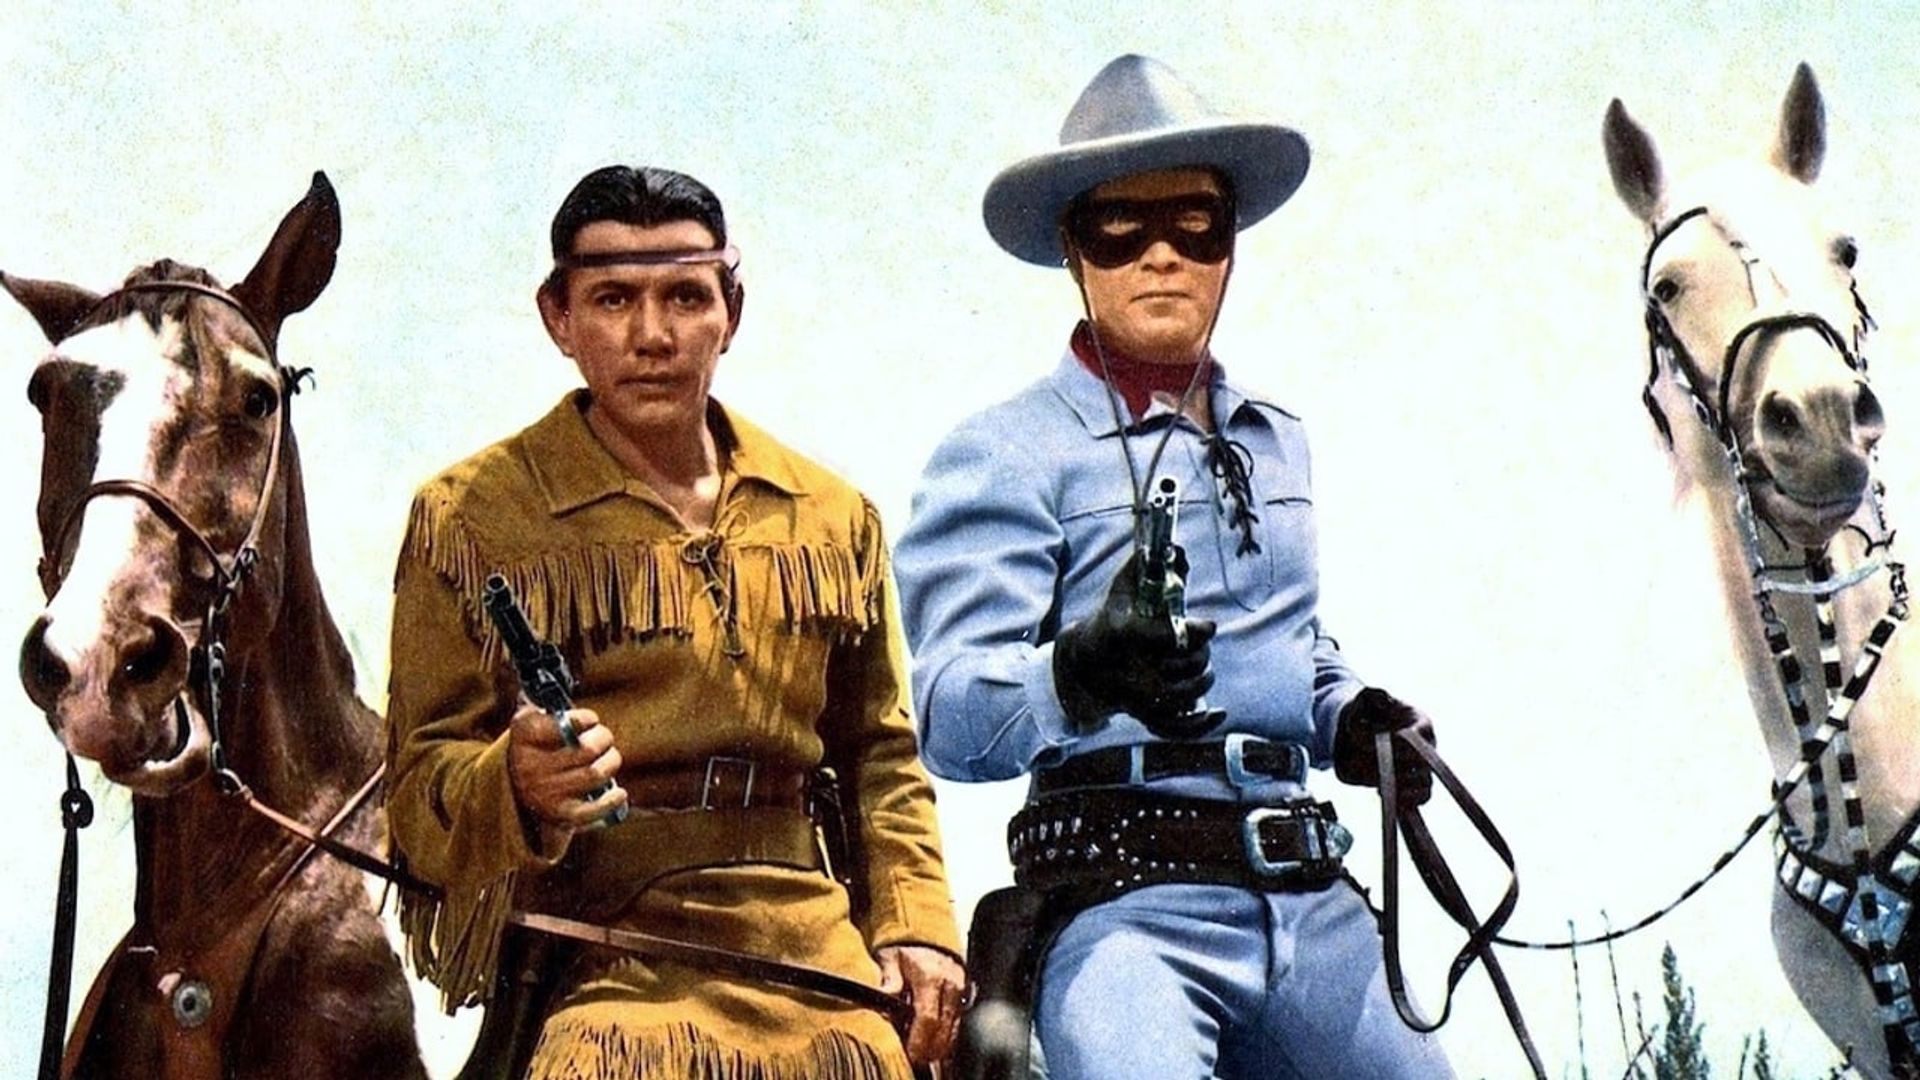 The Lone Ranger (Clayton Moore) background